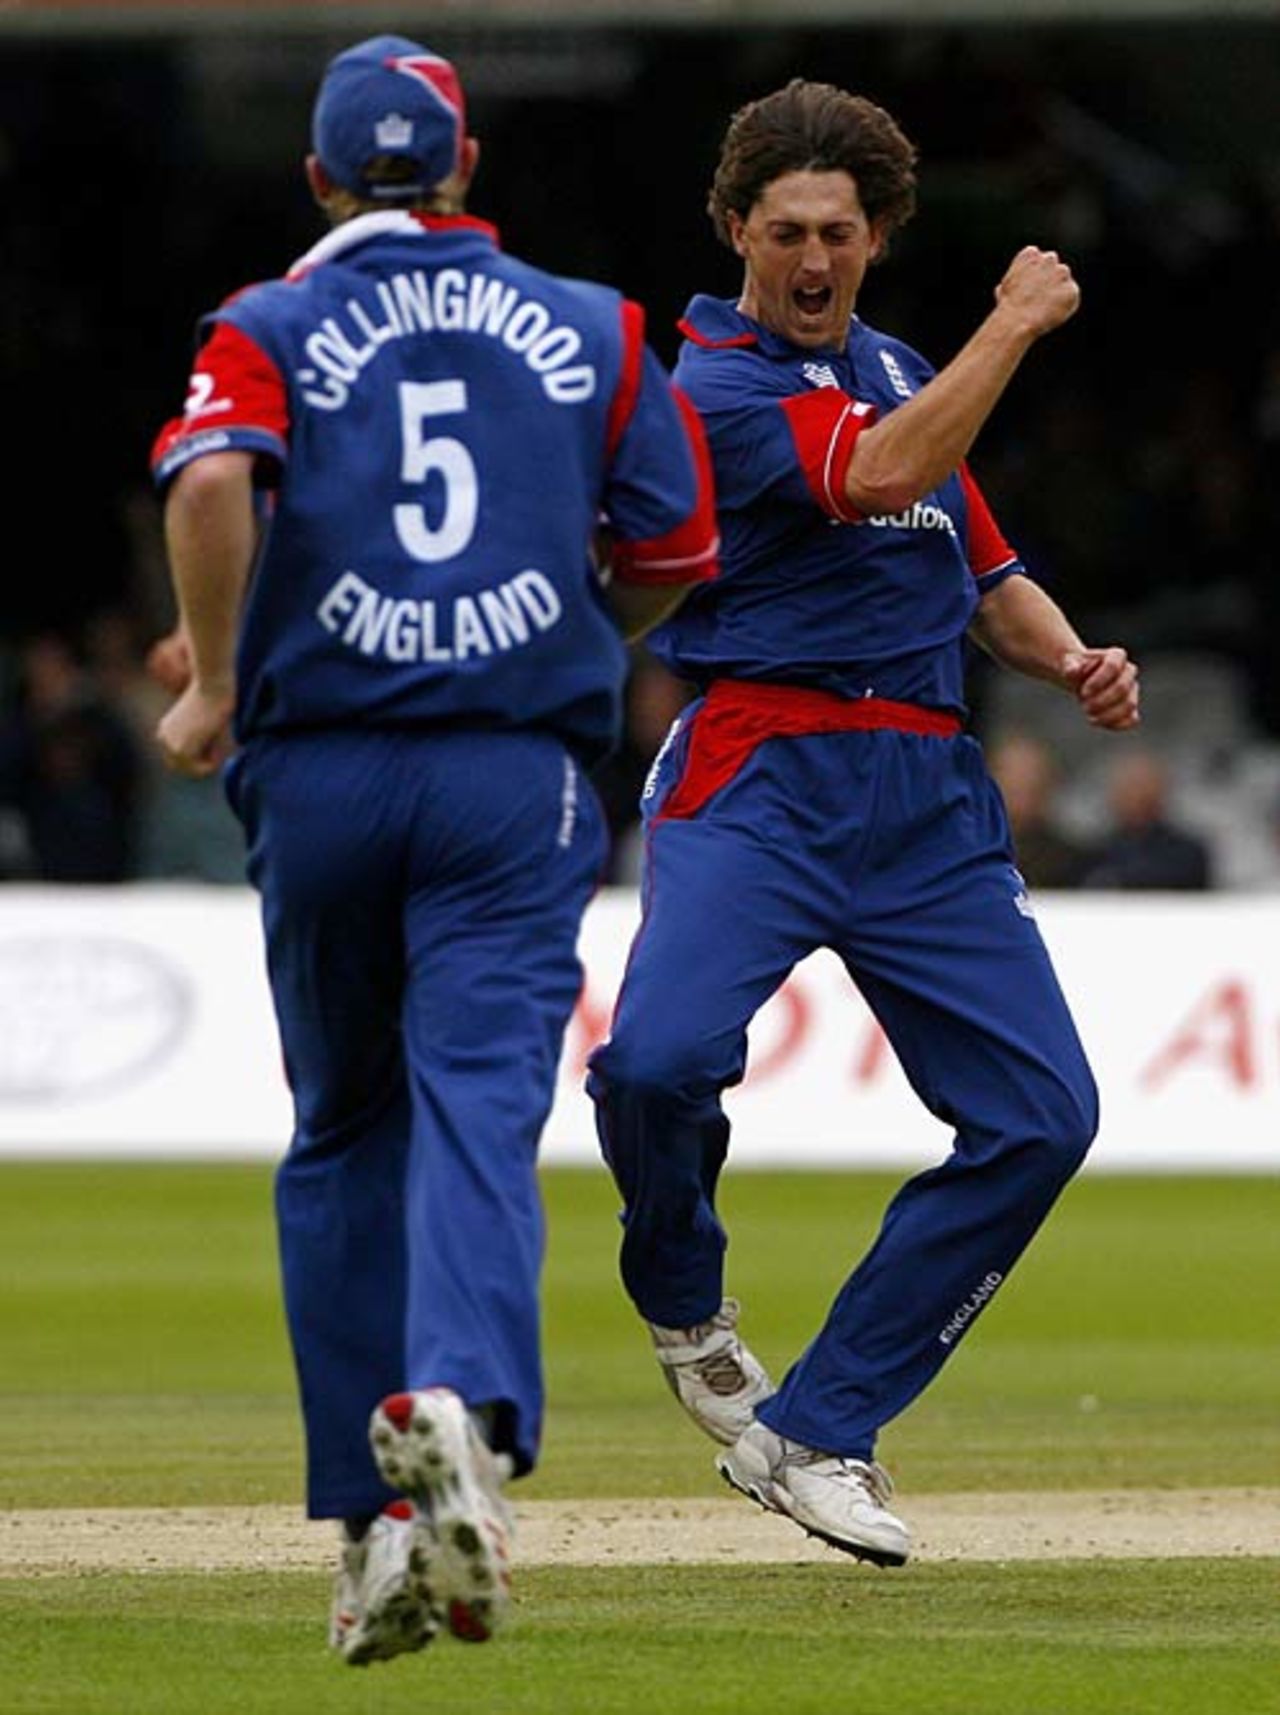 Jon Lewis pumps his fist after dismissing Mohammad Hafeez, England v Pakistan, 2nd ODI, Lord's, September 2, 2006